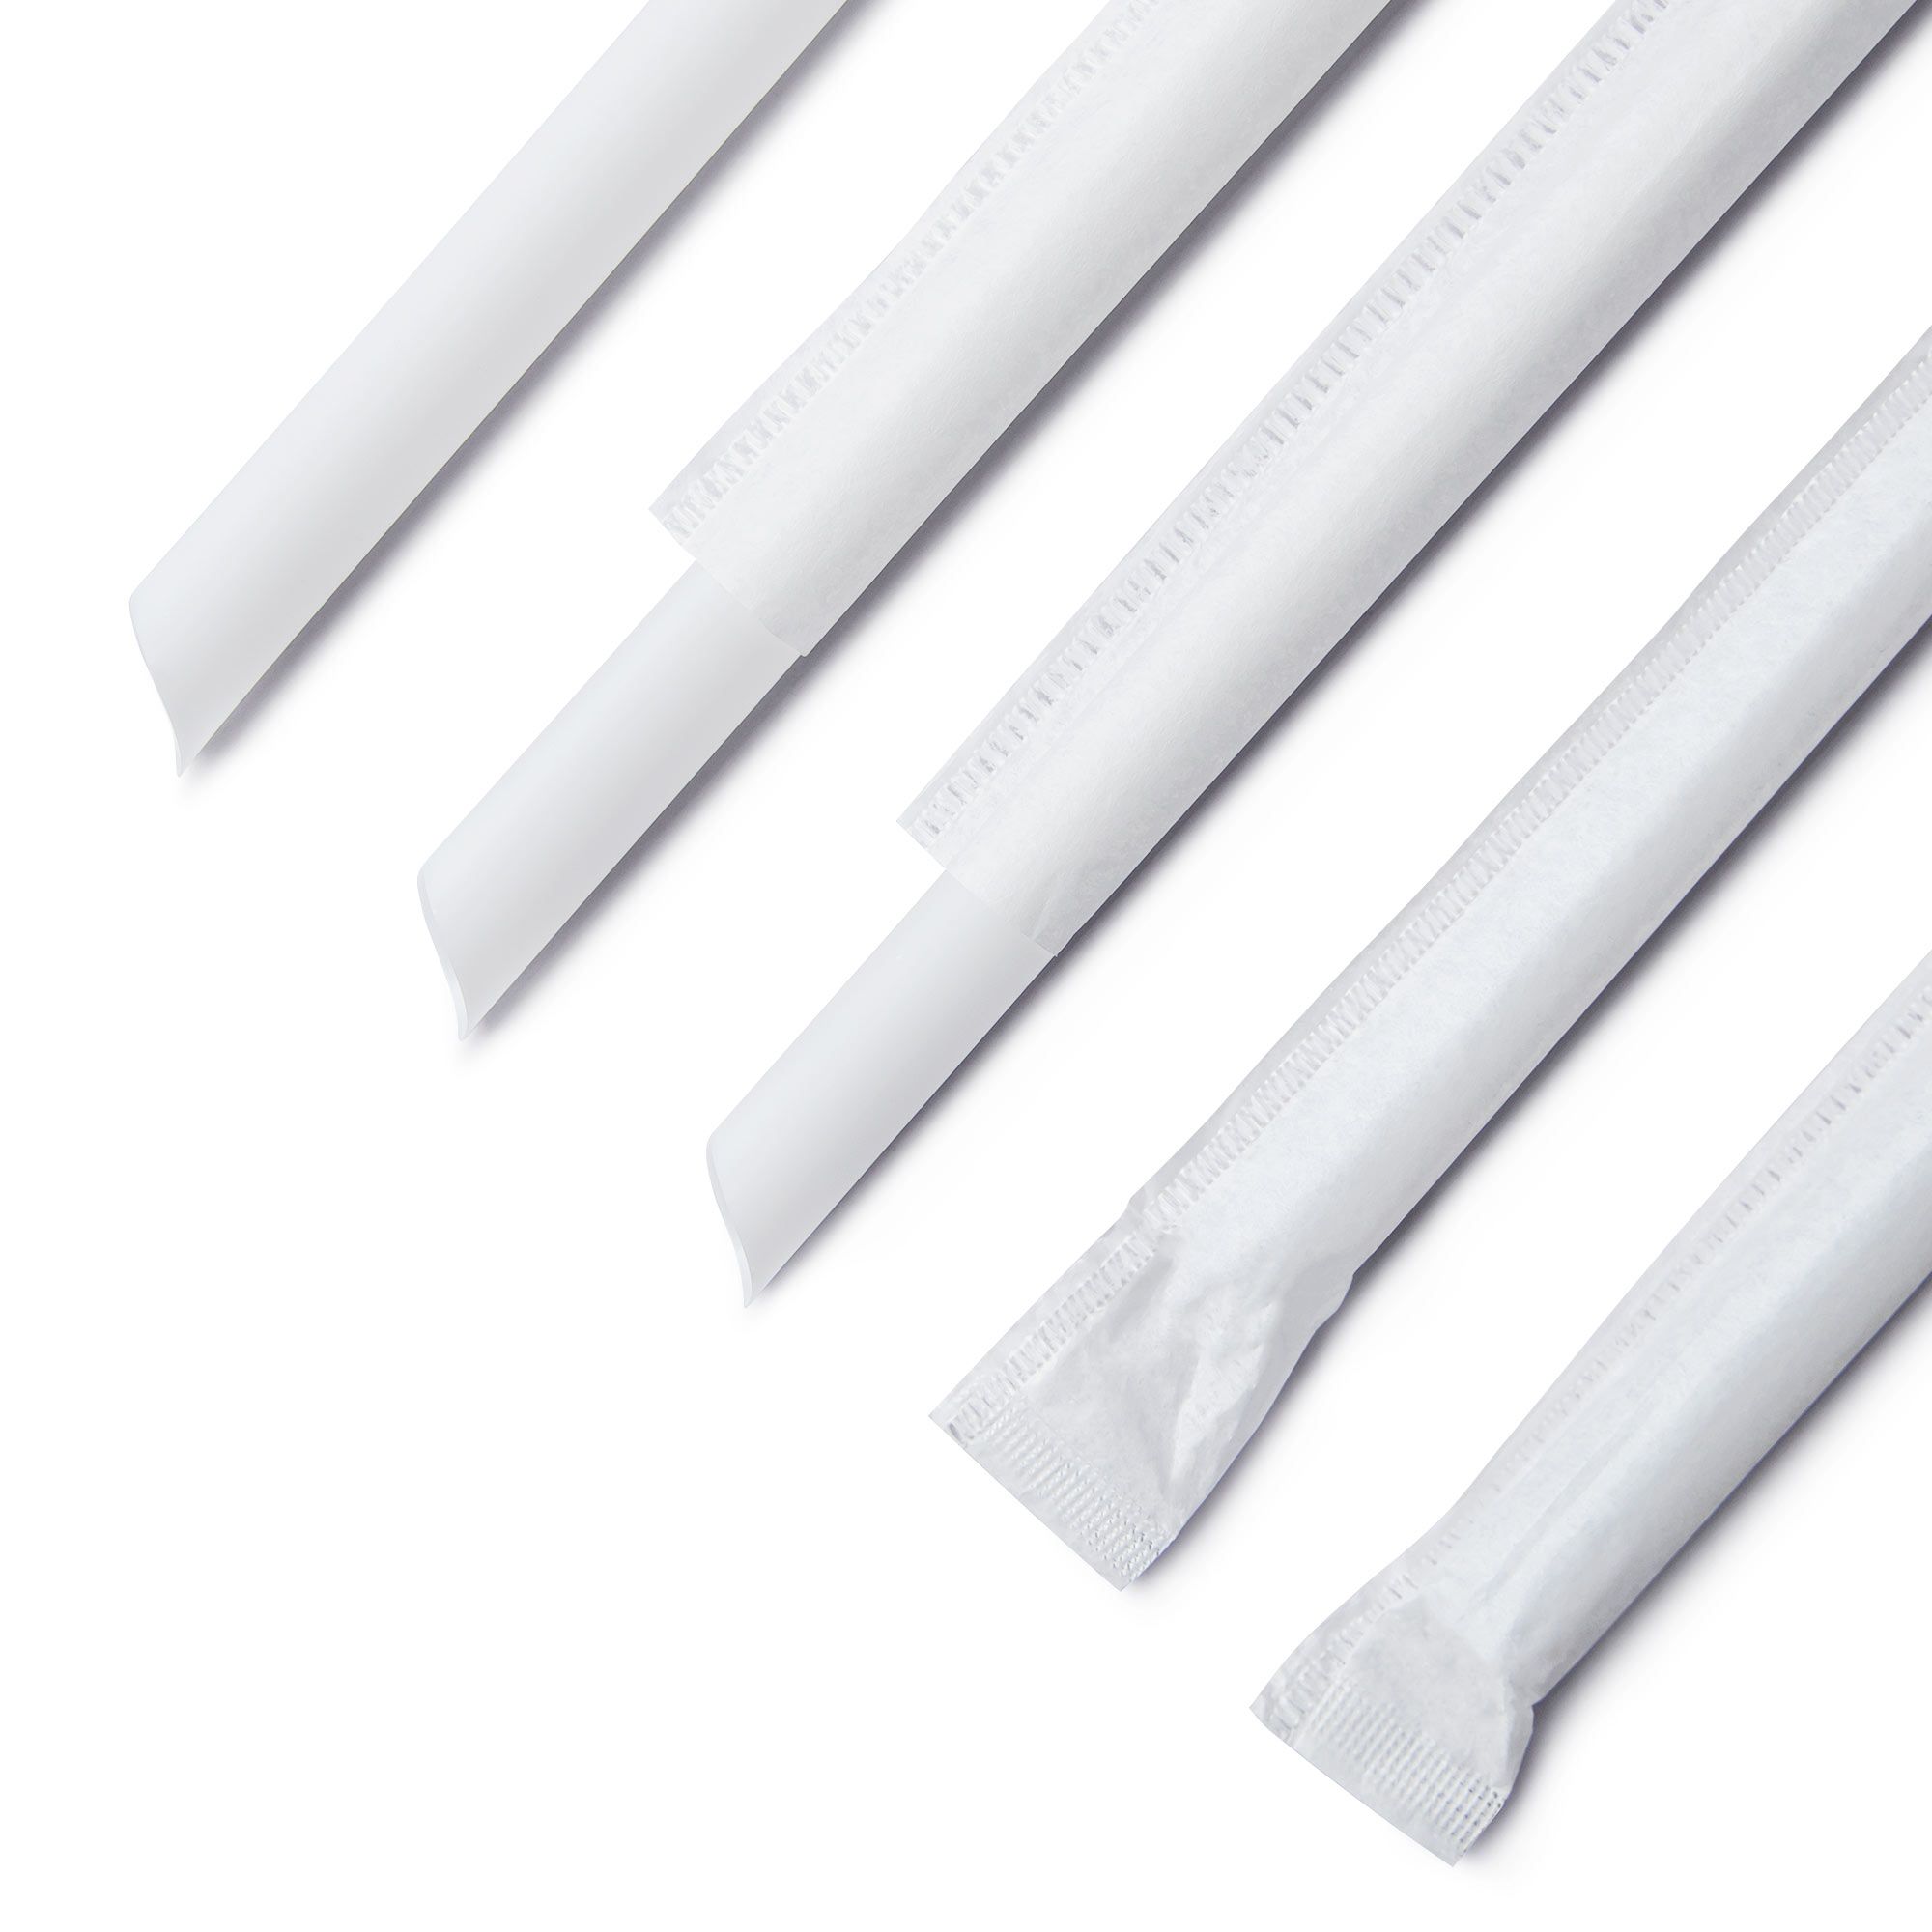 Disposable 12mm Bubble Tea Paper Straw Biodegradable Individual